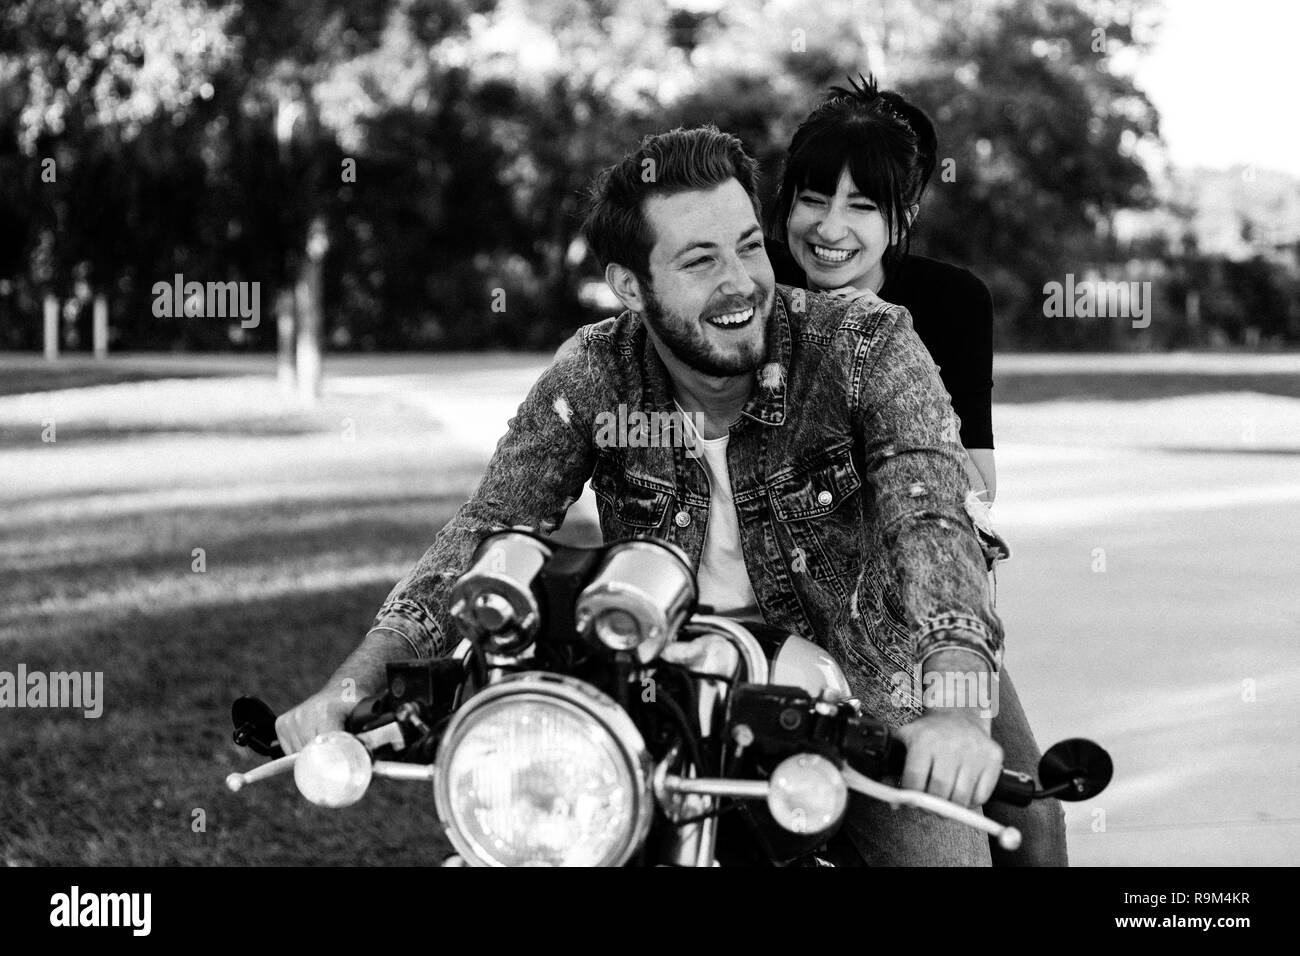 Portrait of Attractive Good Looking Young Modern Trendy Fashionable Guy Girl Couple Riding on Green Motorcycle Cruiser Classic Bike in Love Stock Photo